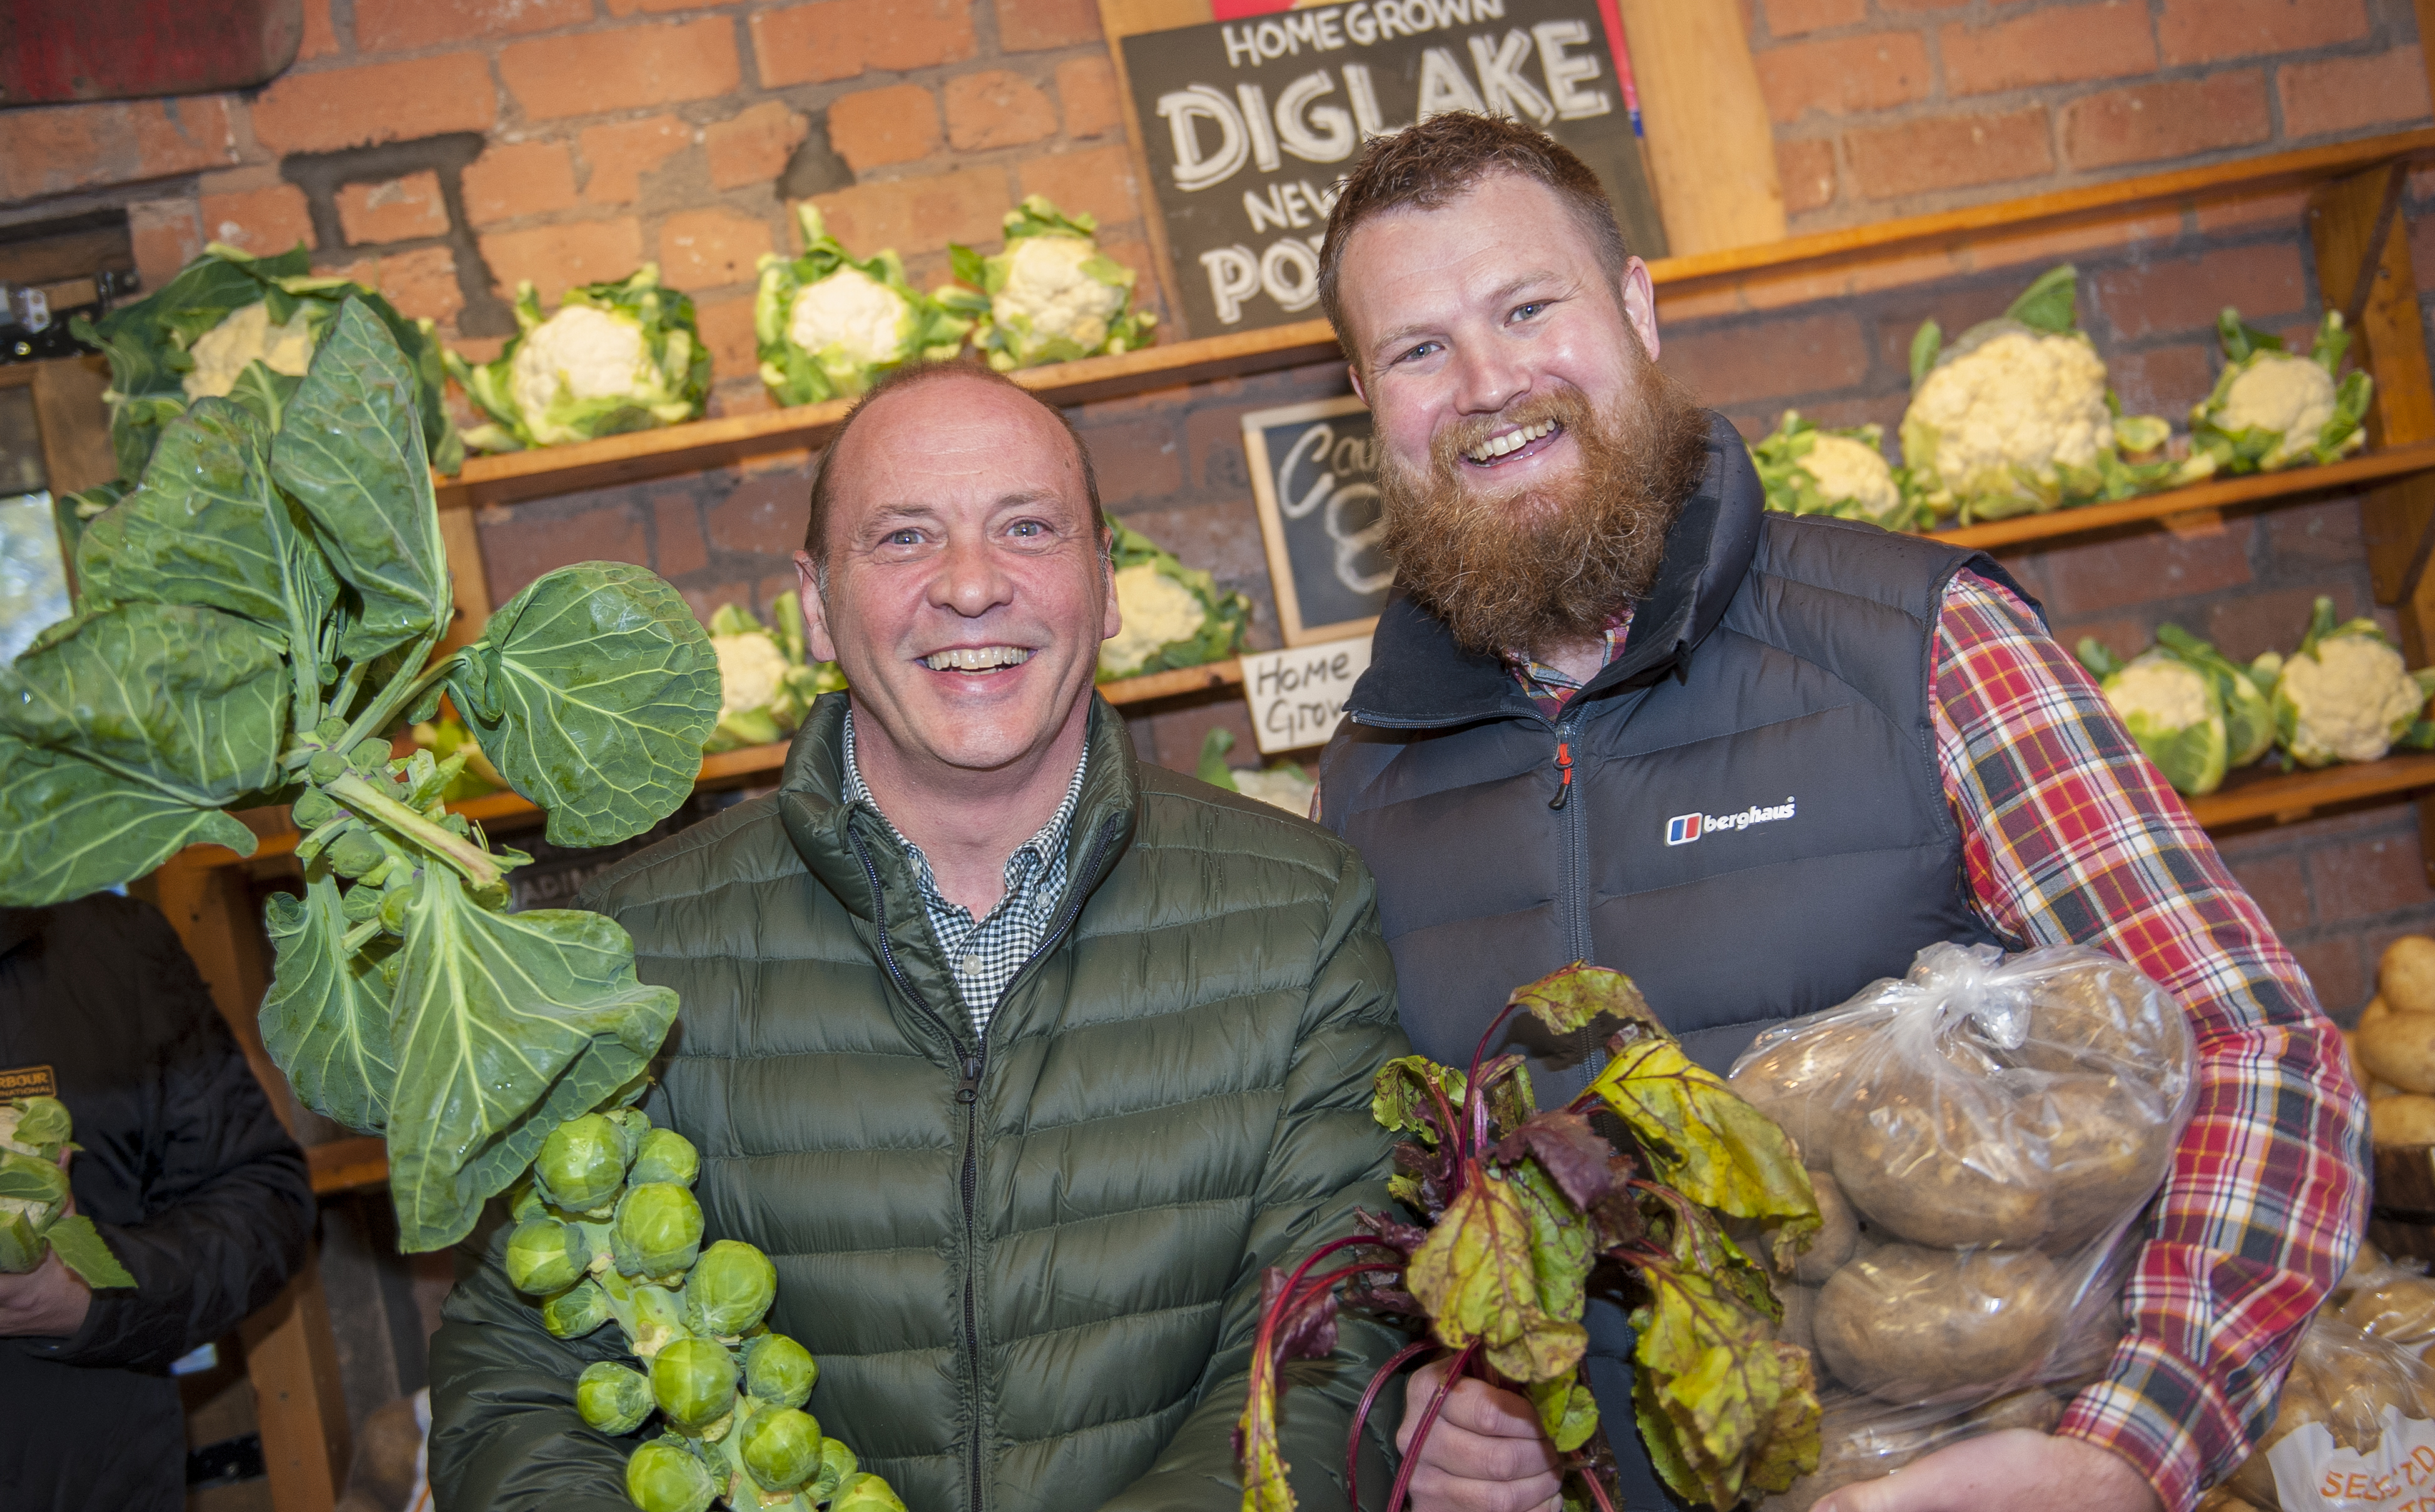 Andy and Brian sourcing local produce